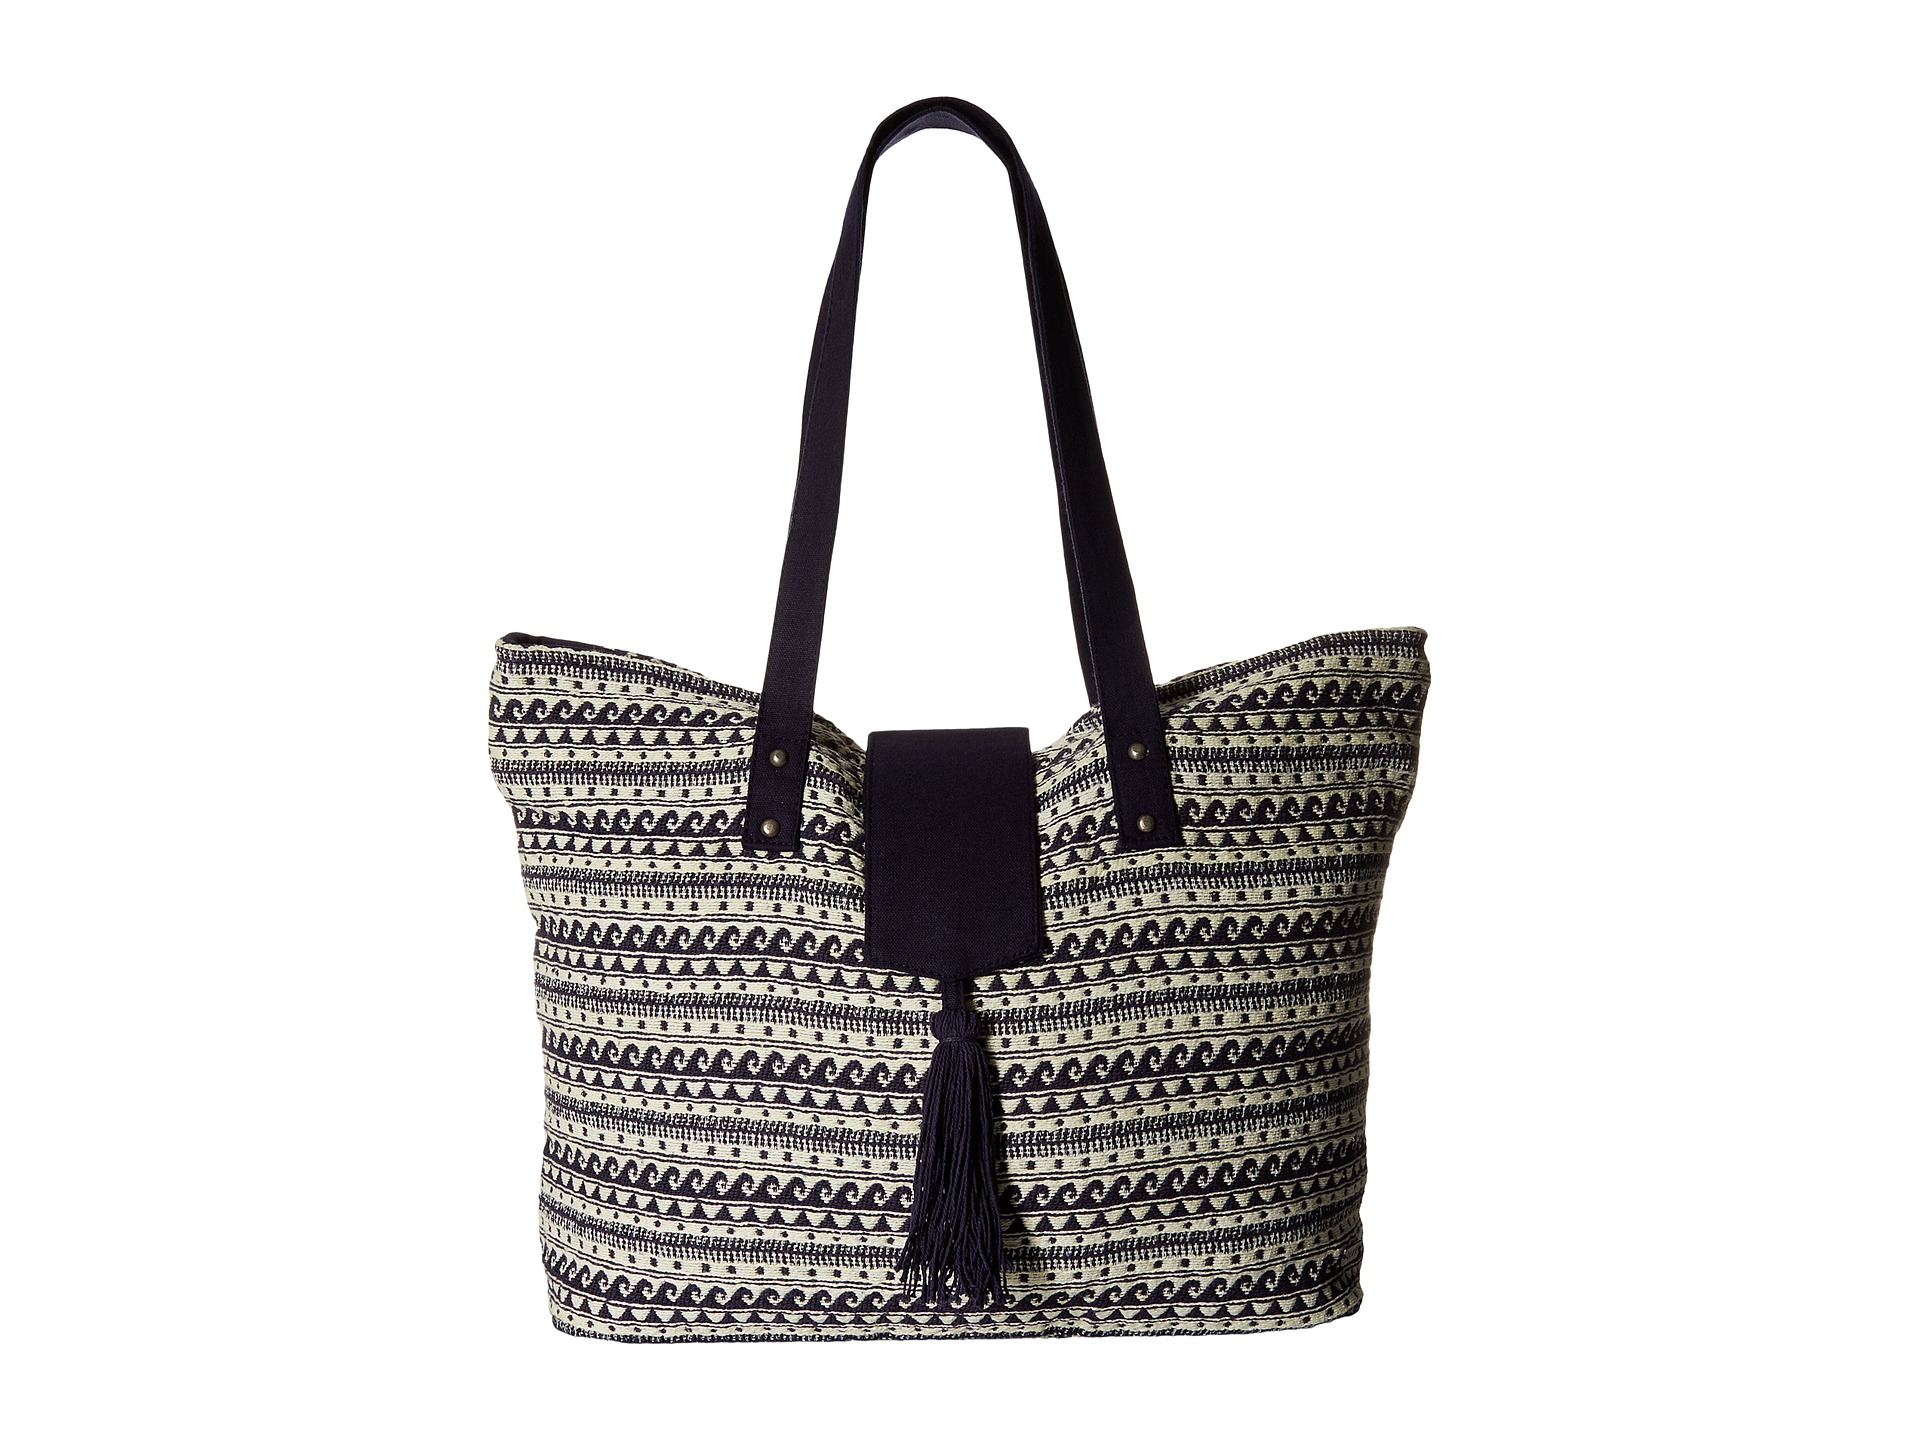 Lyst - Roxy Indian Sky Tote Bag in Gray